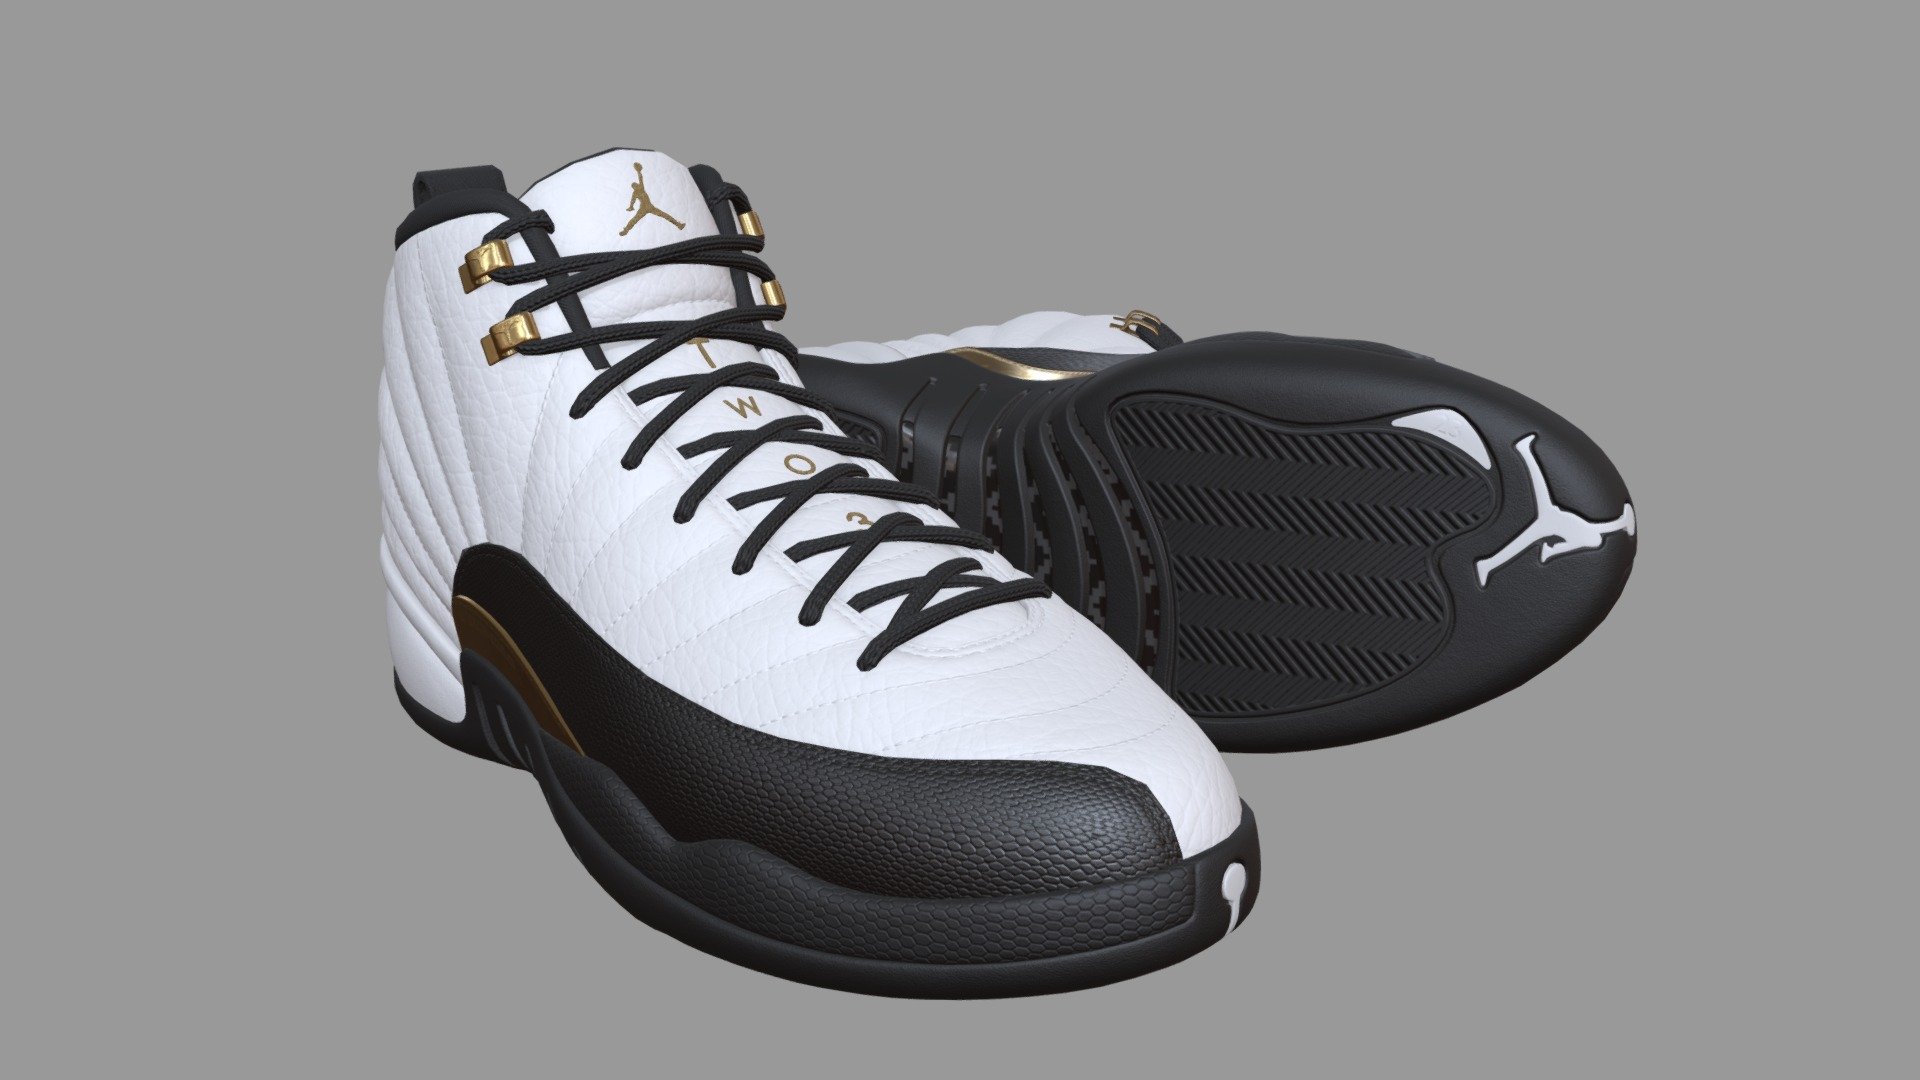 Medium poly PBR textured model of Air Jordan 12-retro sneakers. The model is made up of one 4k texture set (i.e albedo, normal, roughness and metalness). The model is well textured and ready for Virtual Reality (VR), Augmented Reality (AR), games and other real-time apps for handheld devices 3d model